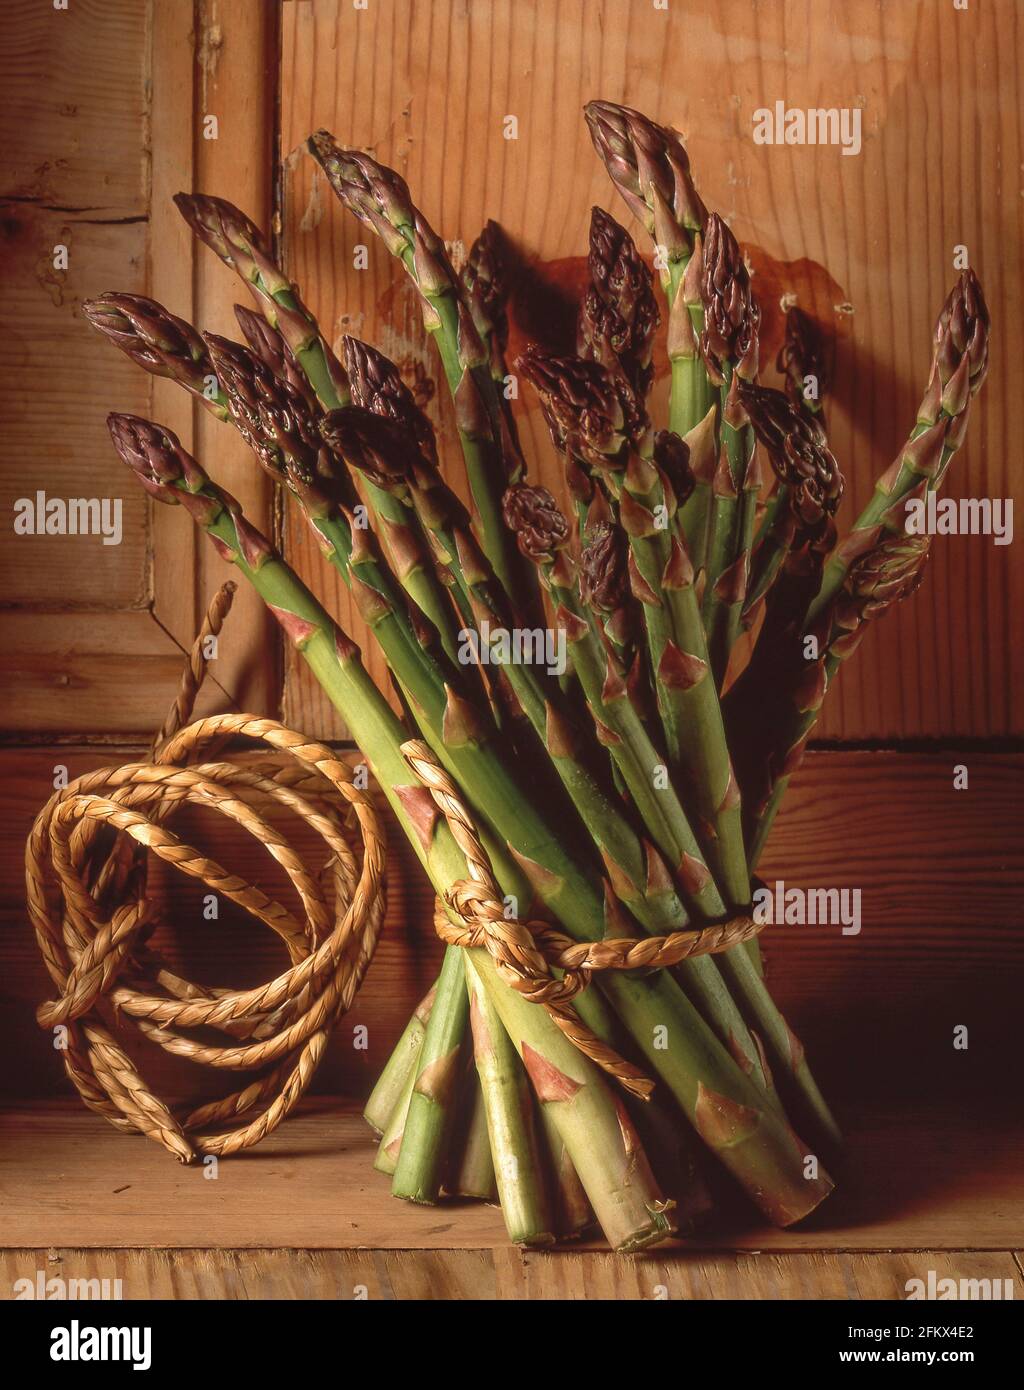 Bunch of string-tied asparagus spears in studio setting, Greater London, England, United Kingdom Stock Photo